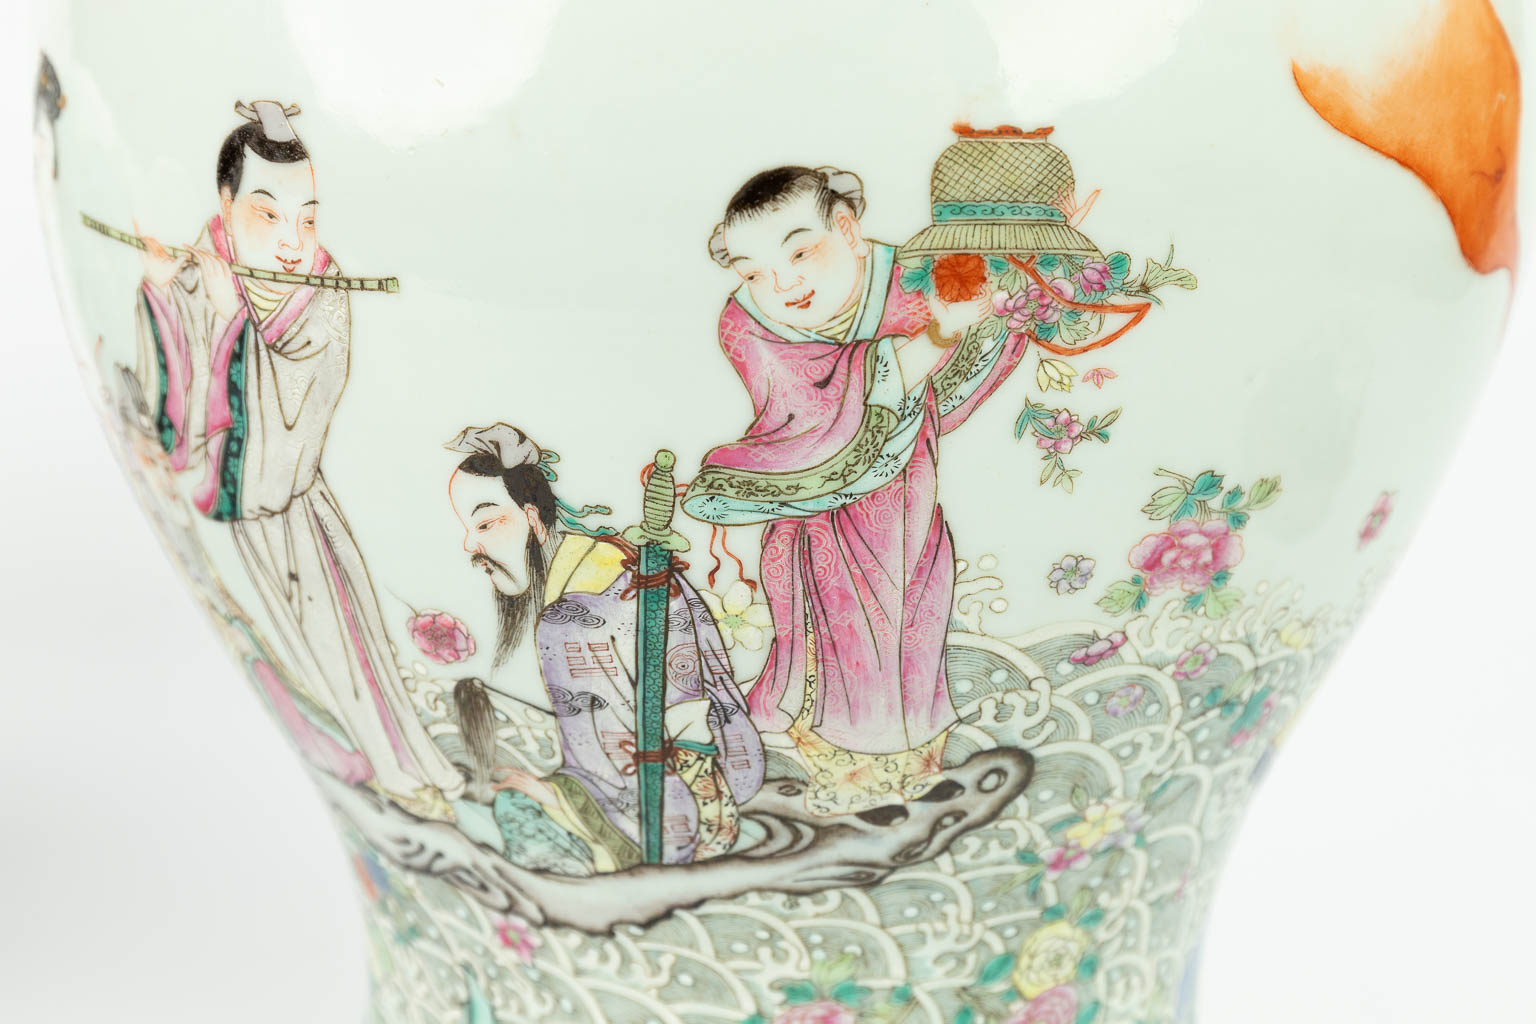 A pair of Chinese baluster vases with hand-painted decor 